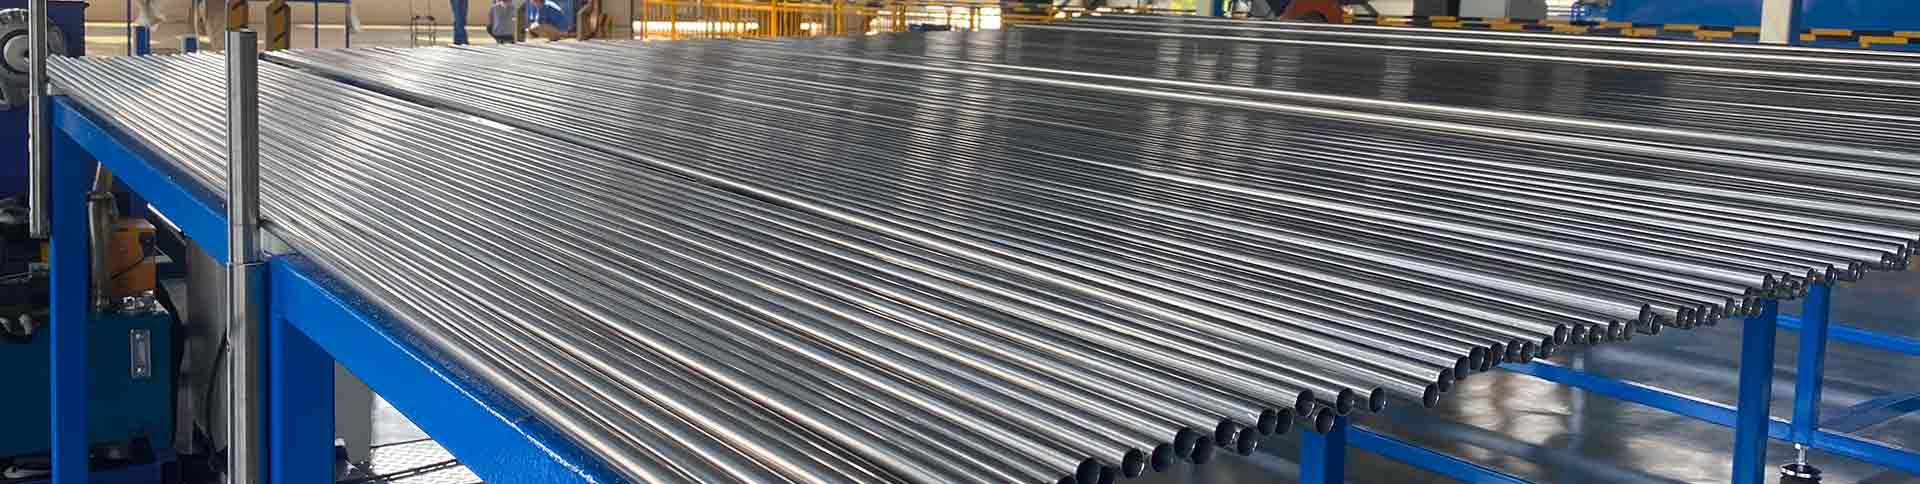 Why A249 Stainless Steel Tube Is the Preferred Choice for Heat Exchangers